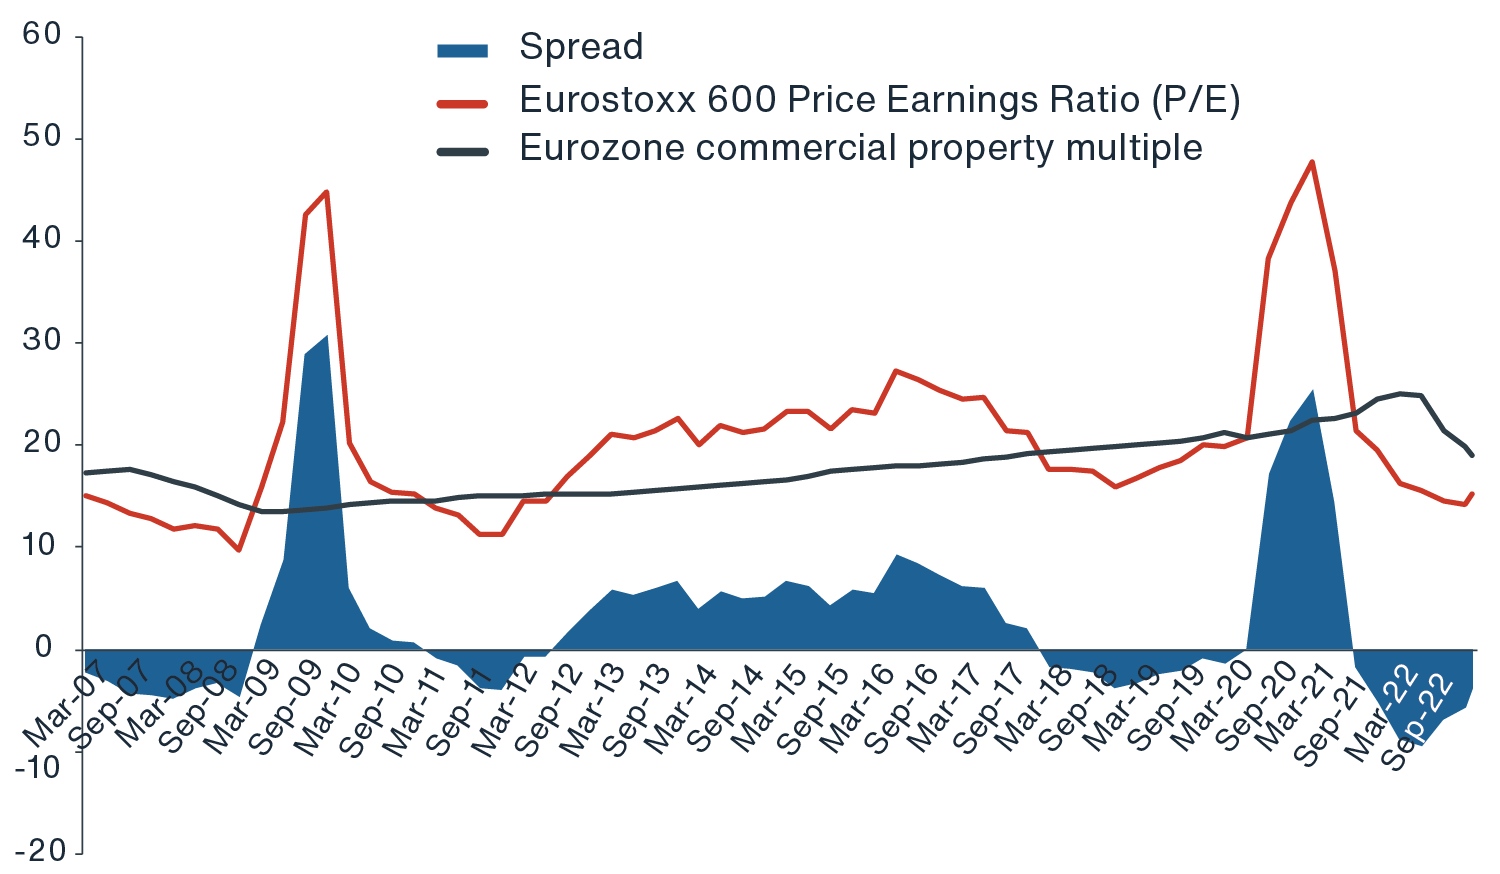 Chart showing M&A activity slowing 2H 2022, but the current spread between P/E and real estate multiples remains attractive 